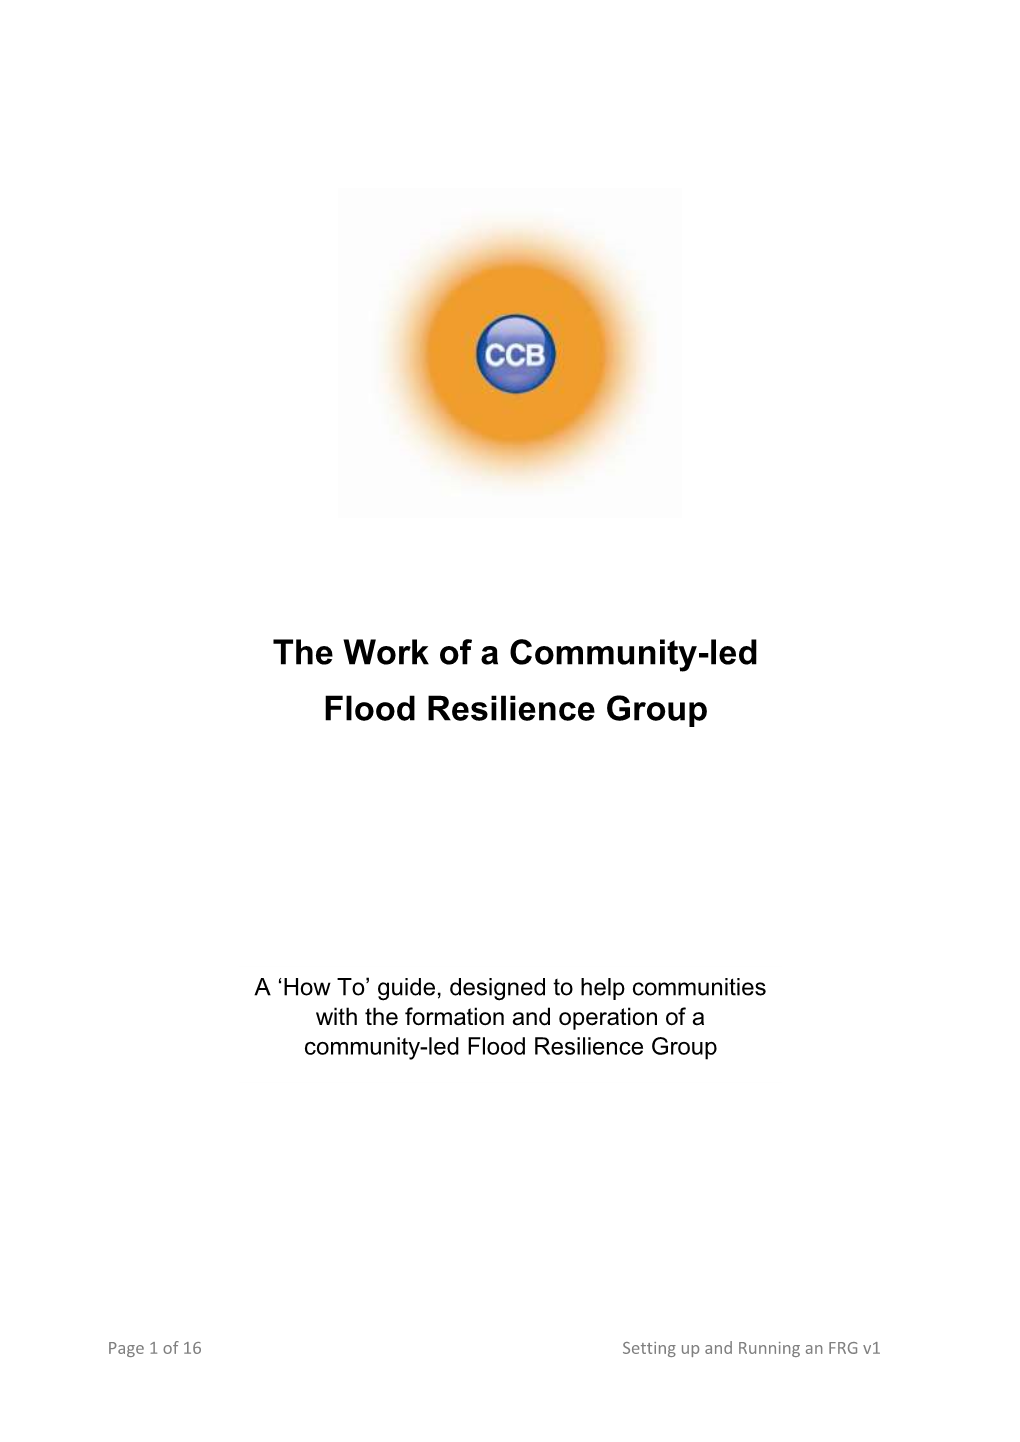 The Work of a Community-Led Flood Resilience Group